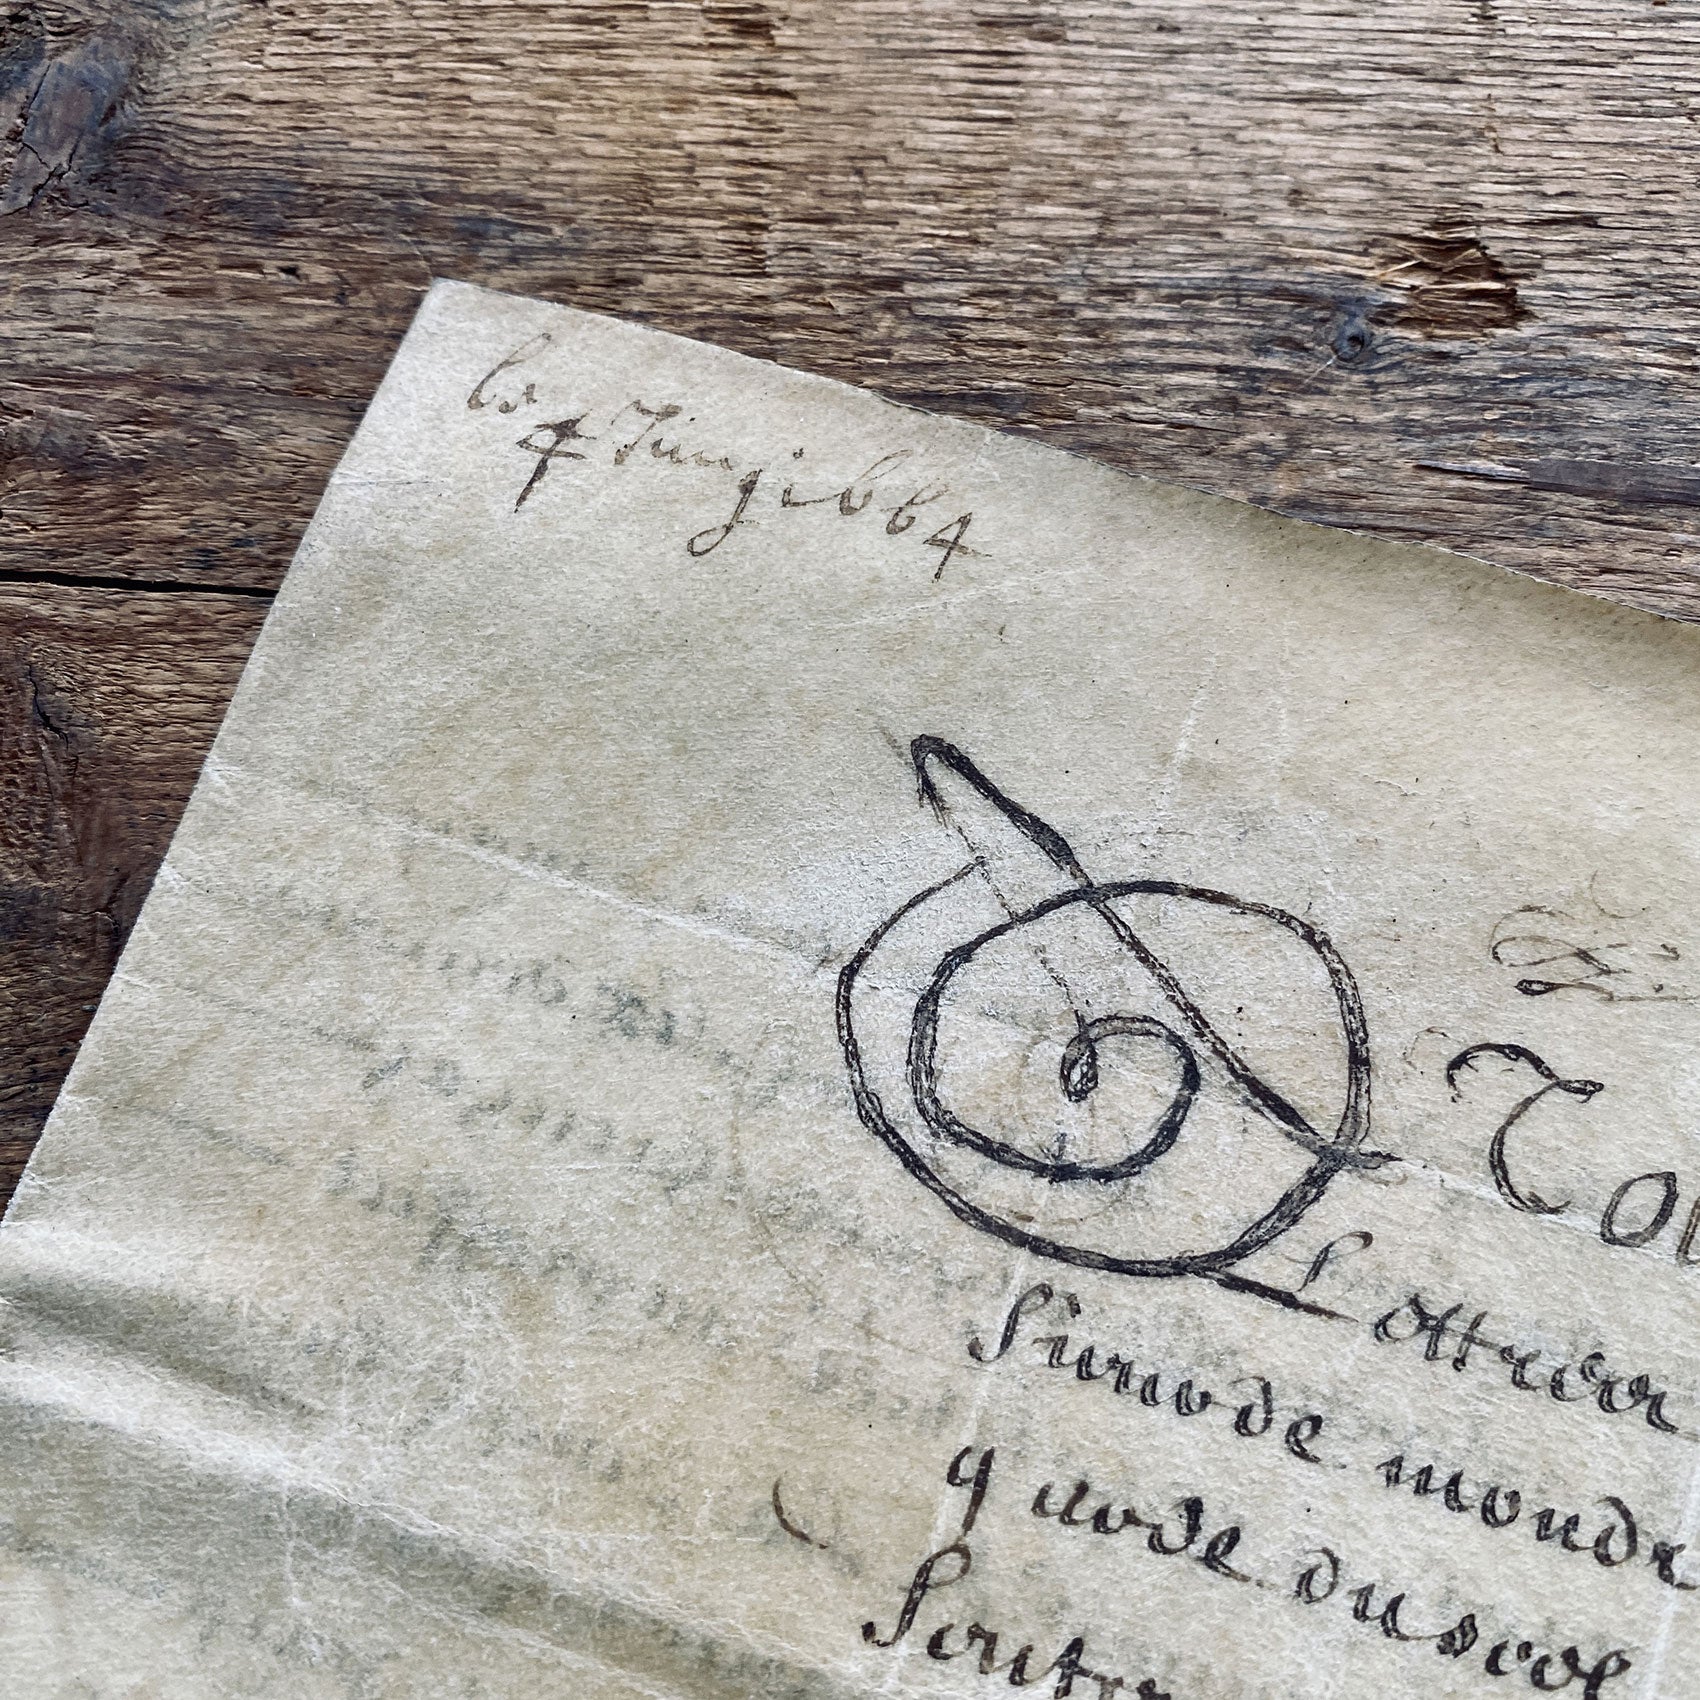 1664 Notarial French parchment (0711-03)